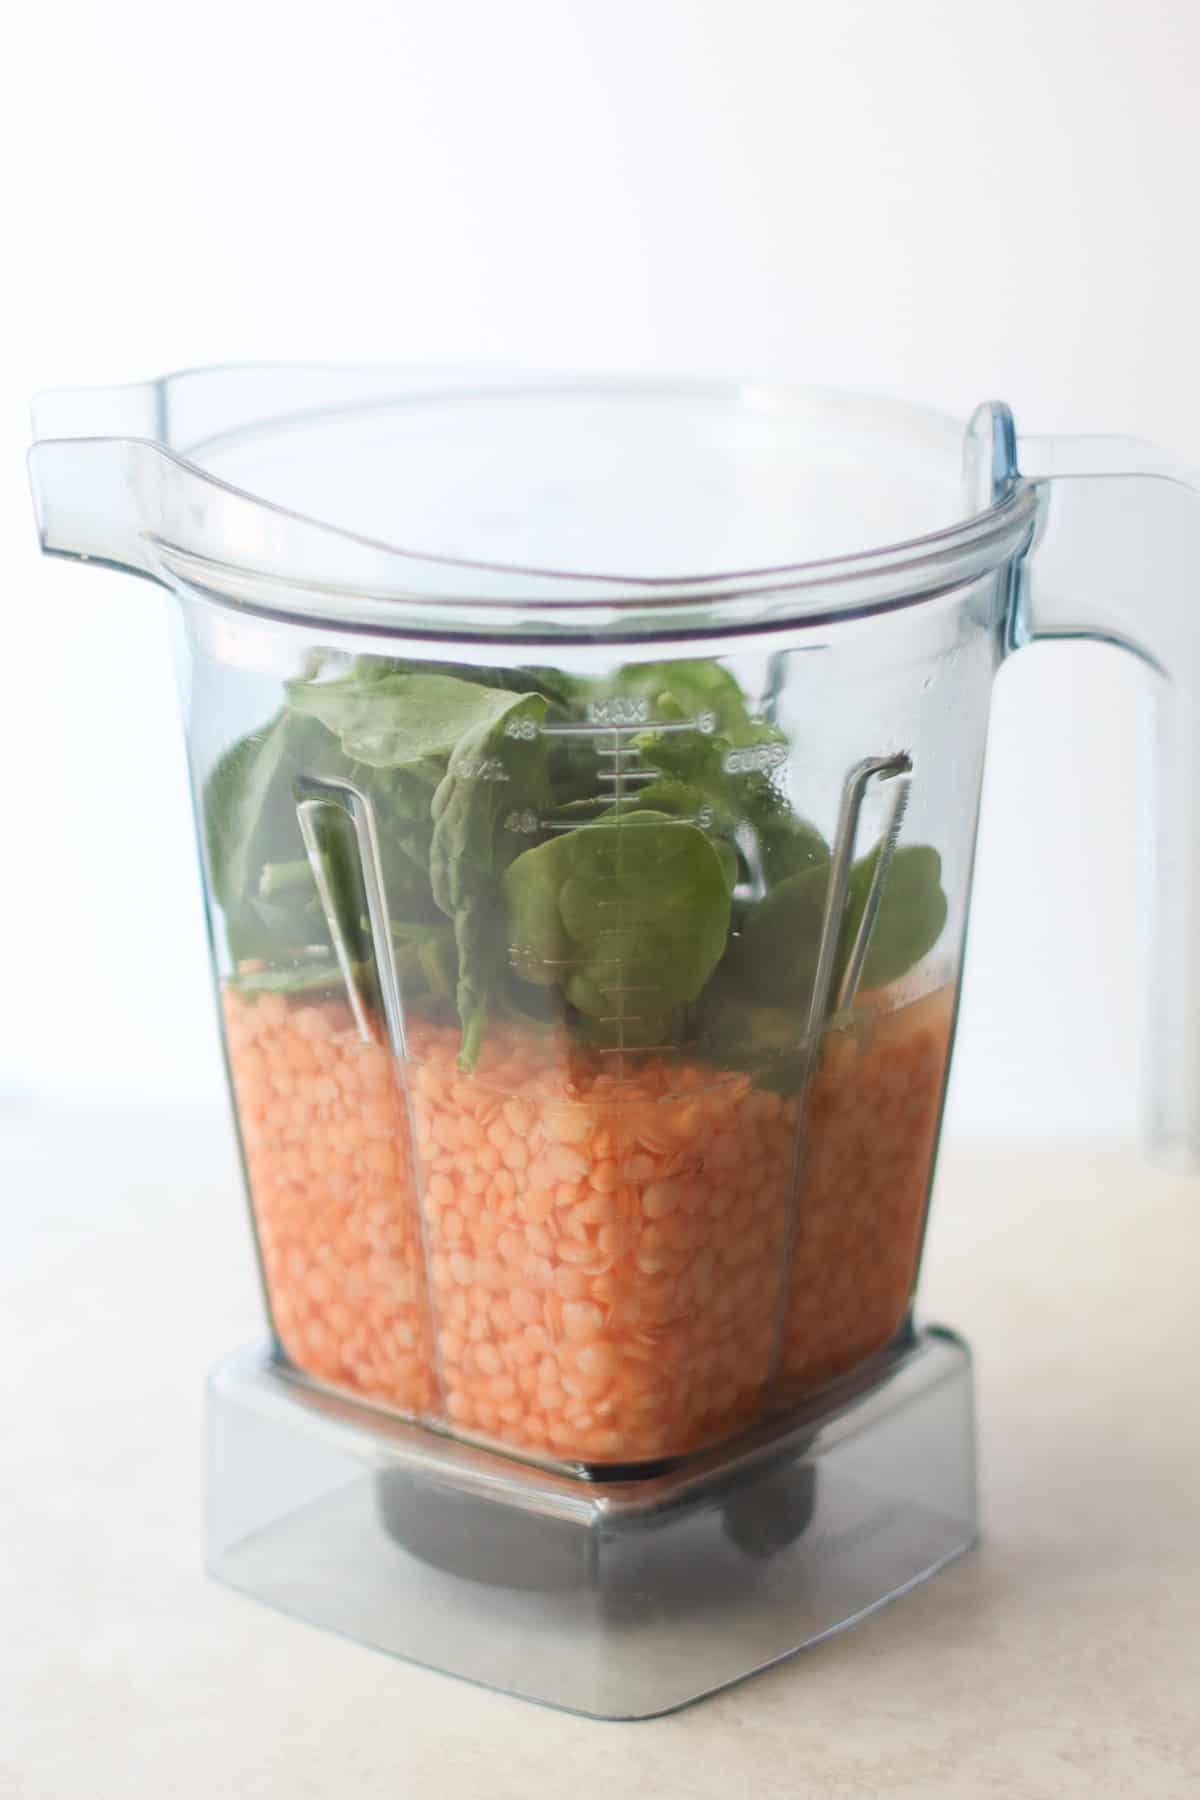 Soaked lentils with spinach in a blender.